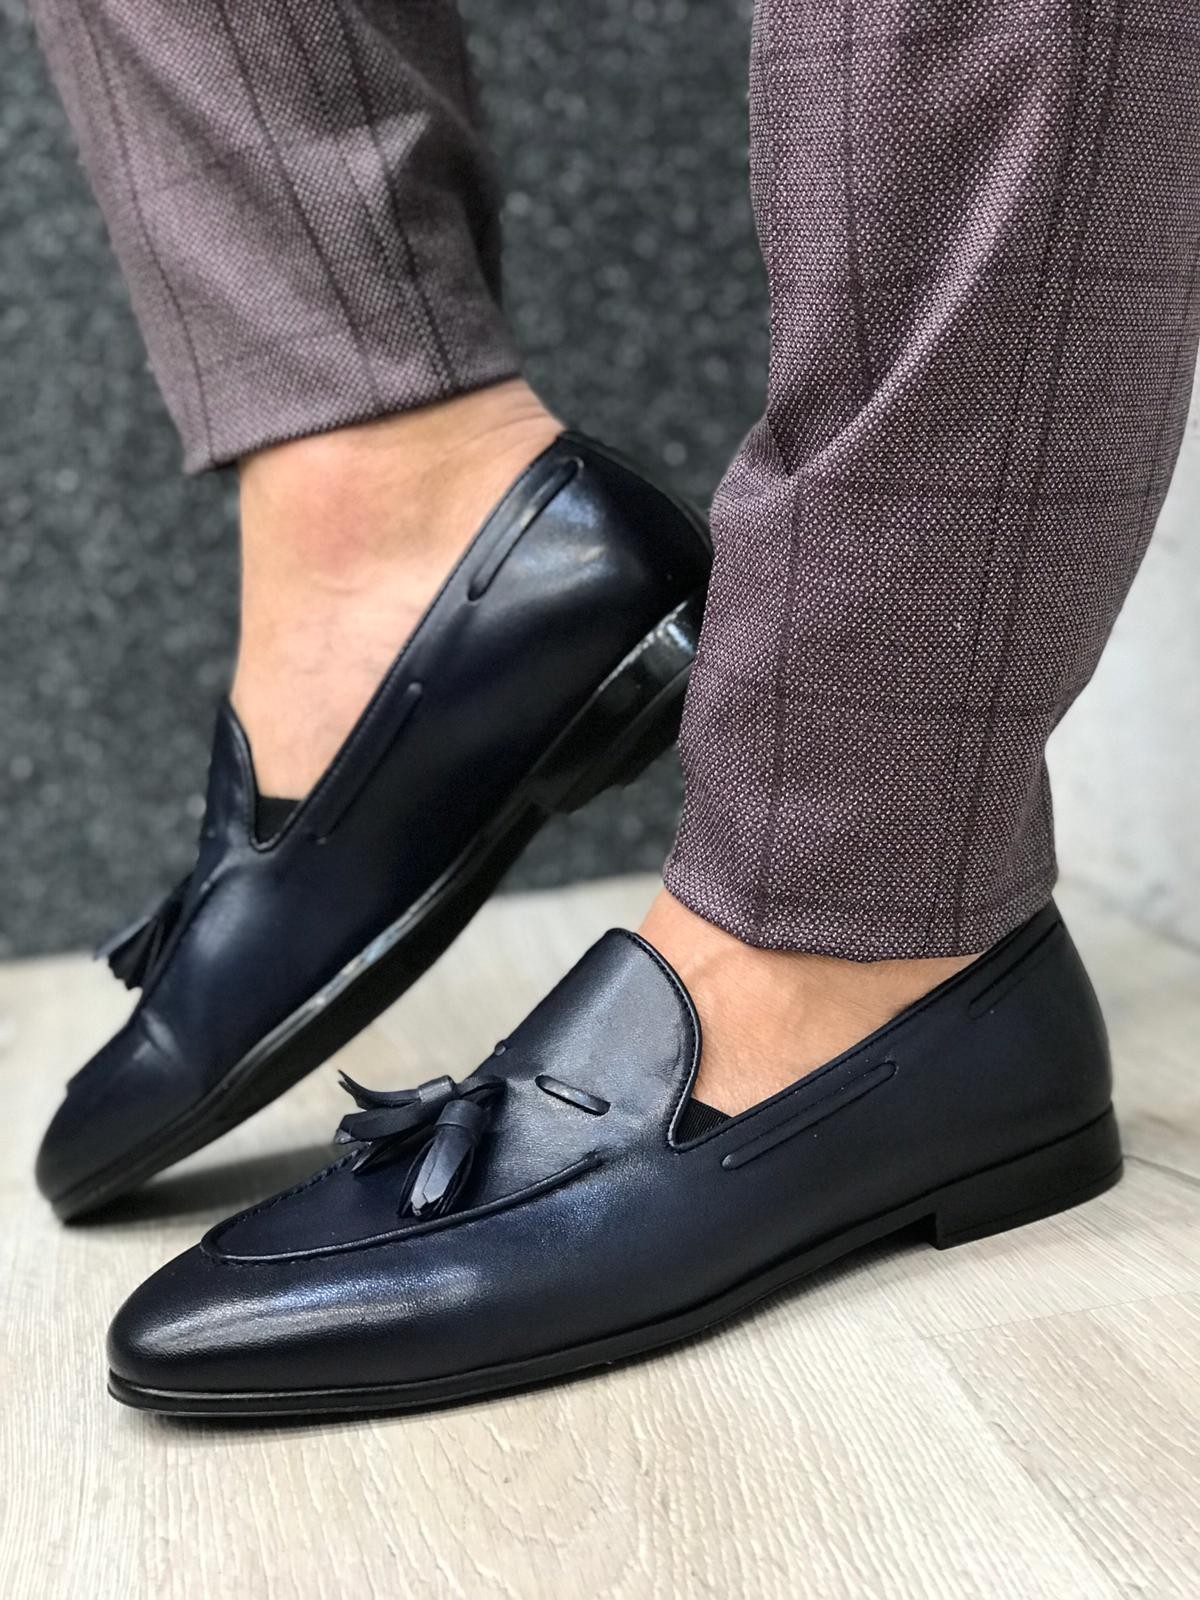 Buy Blue Tassel Loafer by Gentwith.com with Free Shipping